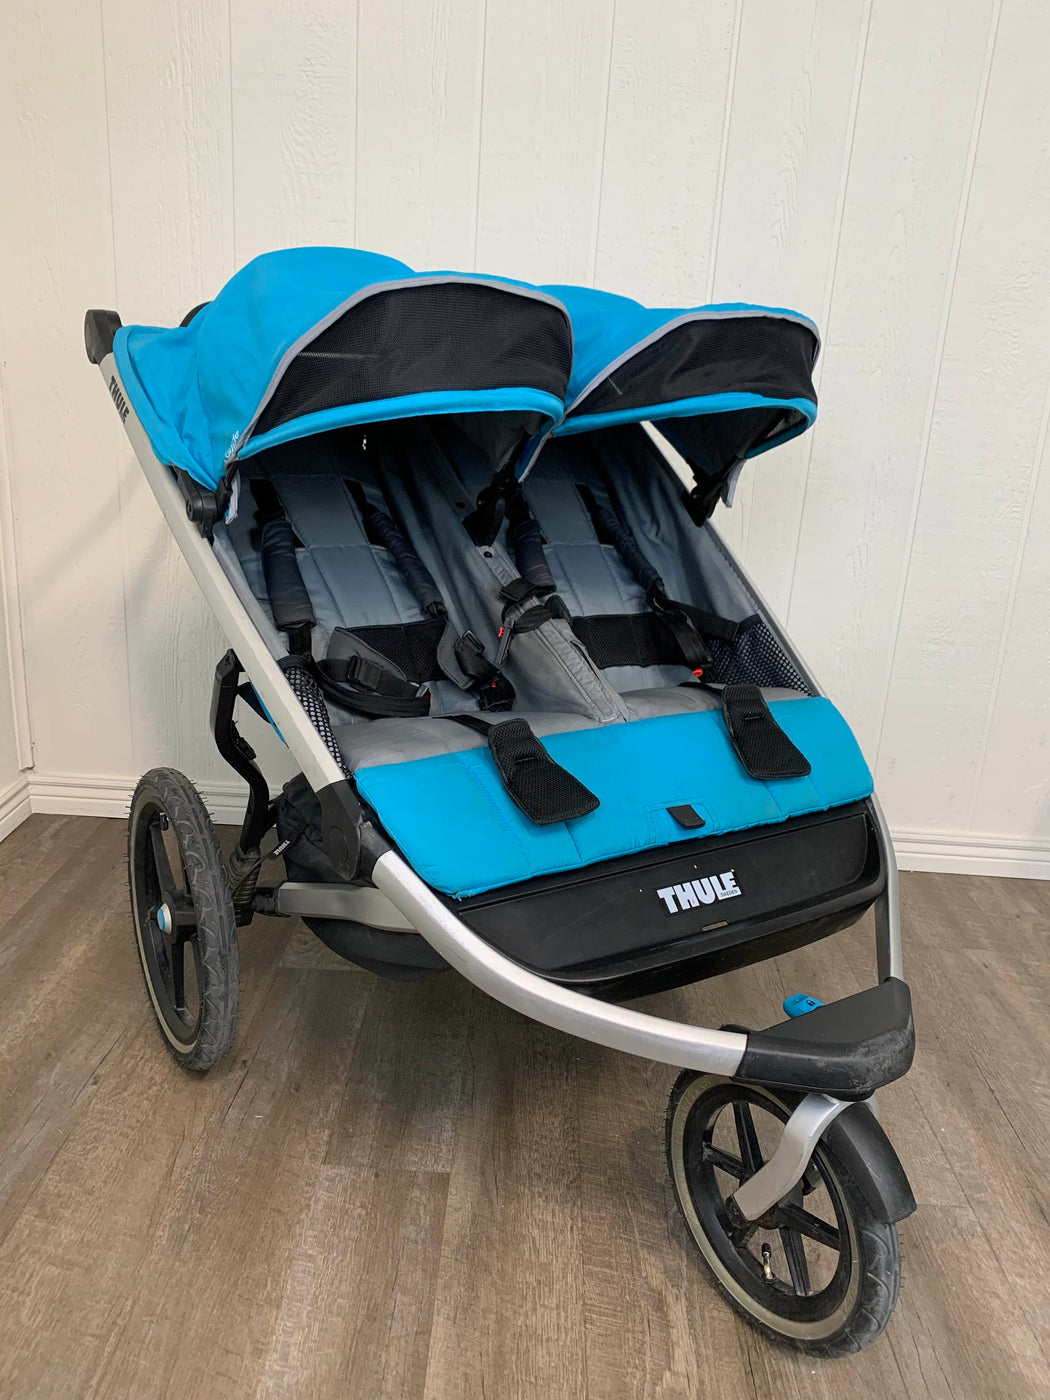 thule double stroller used